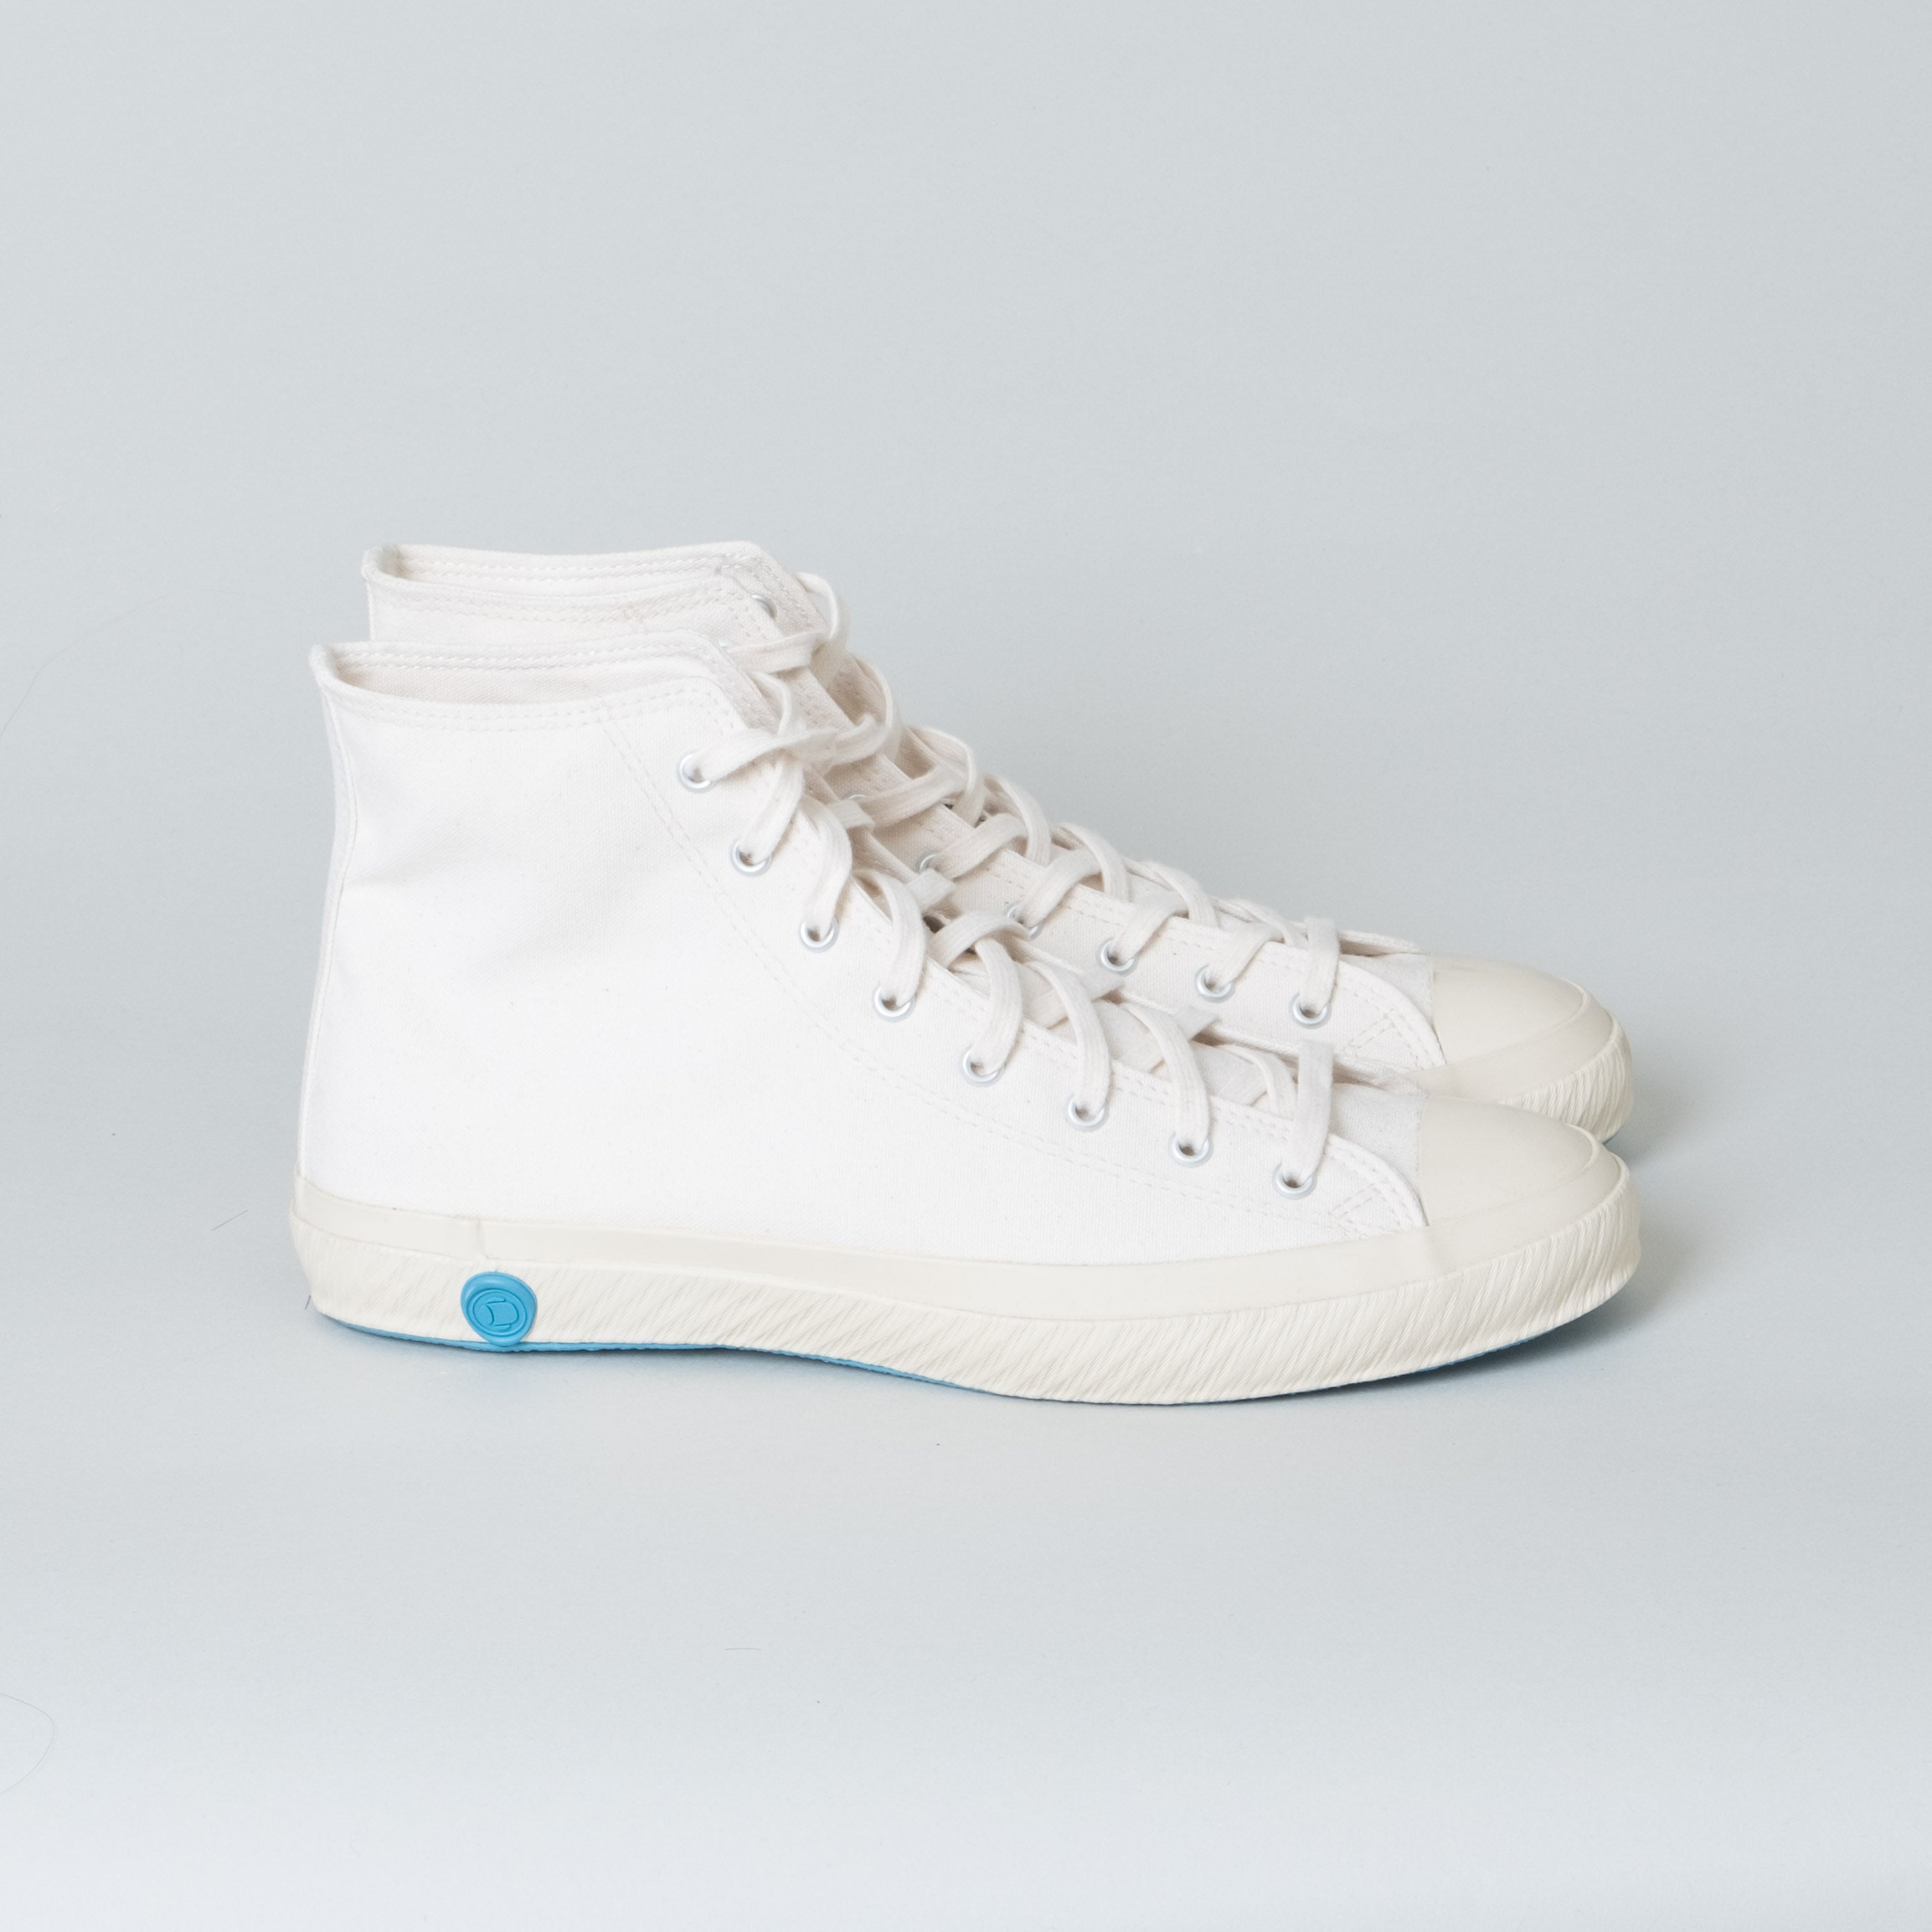 Shoes Like Pottery - White High Top